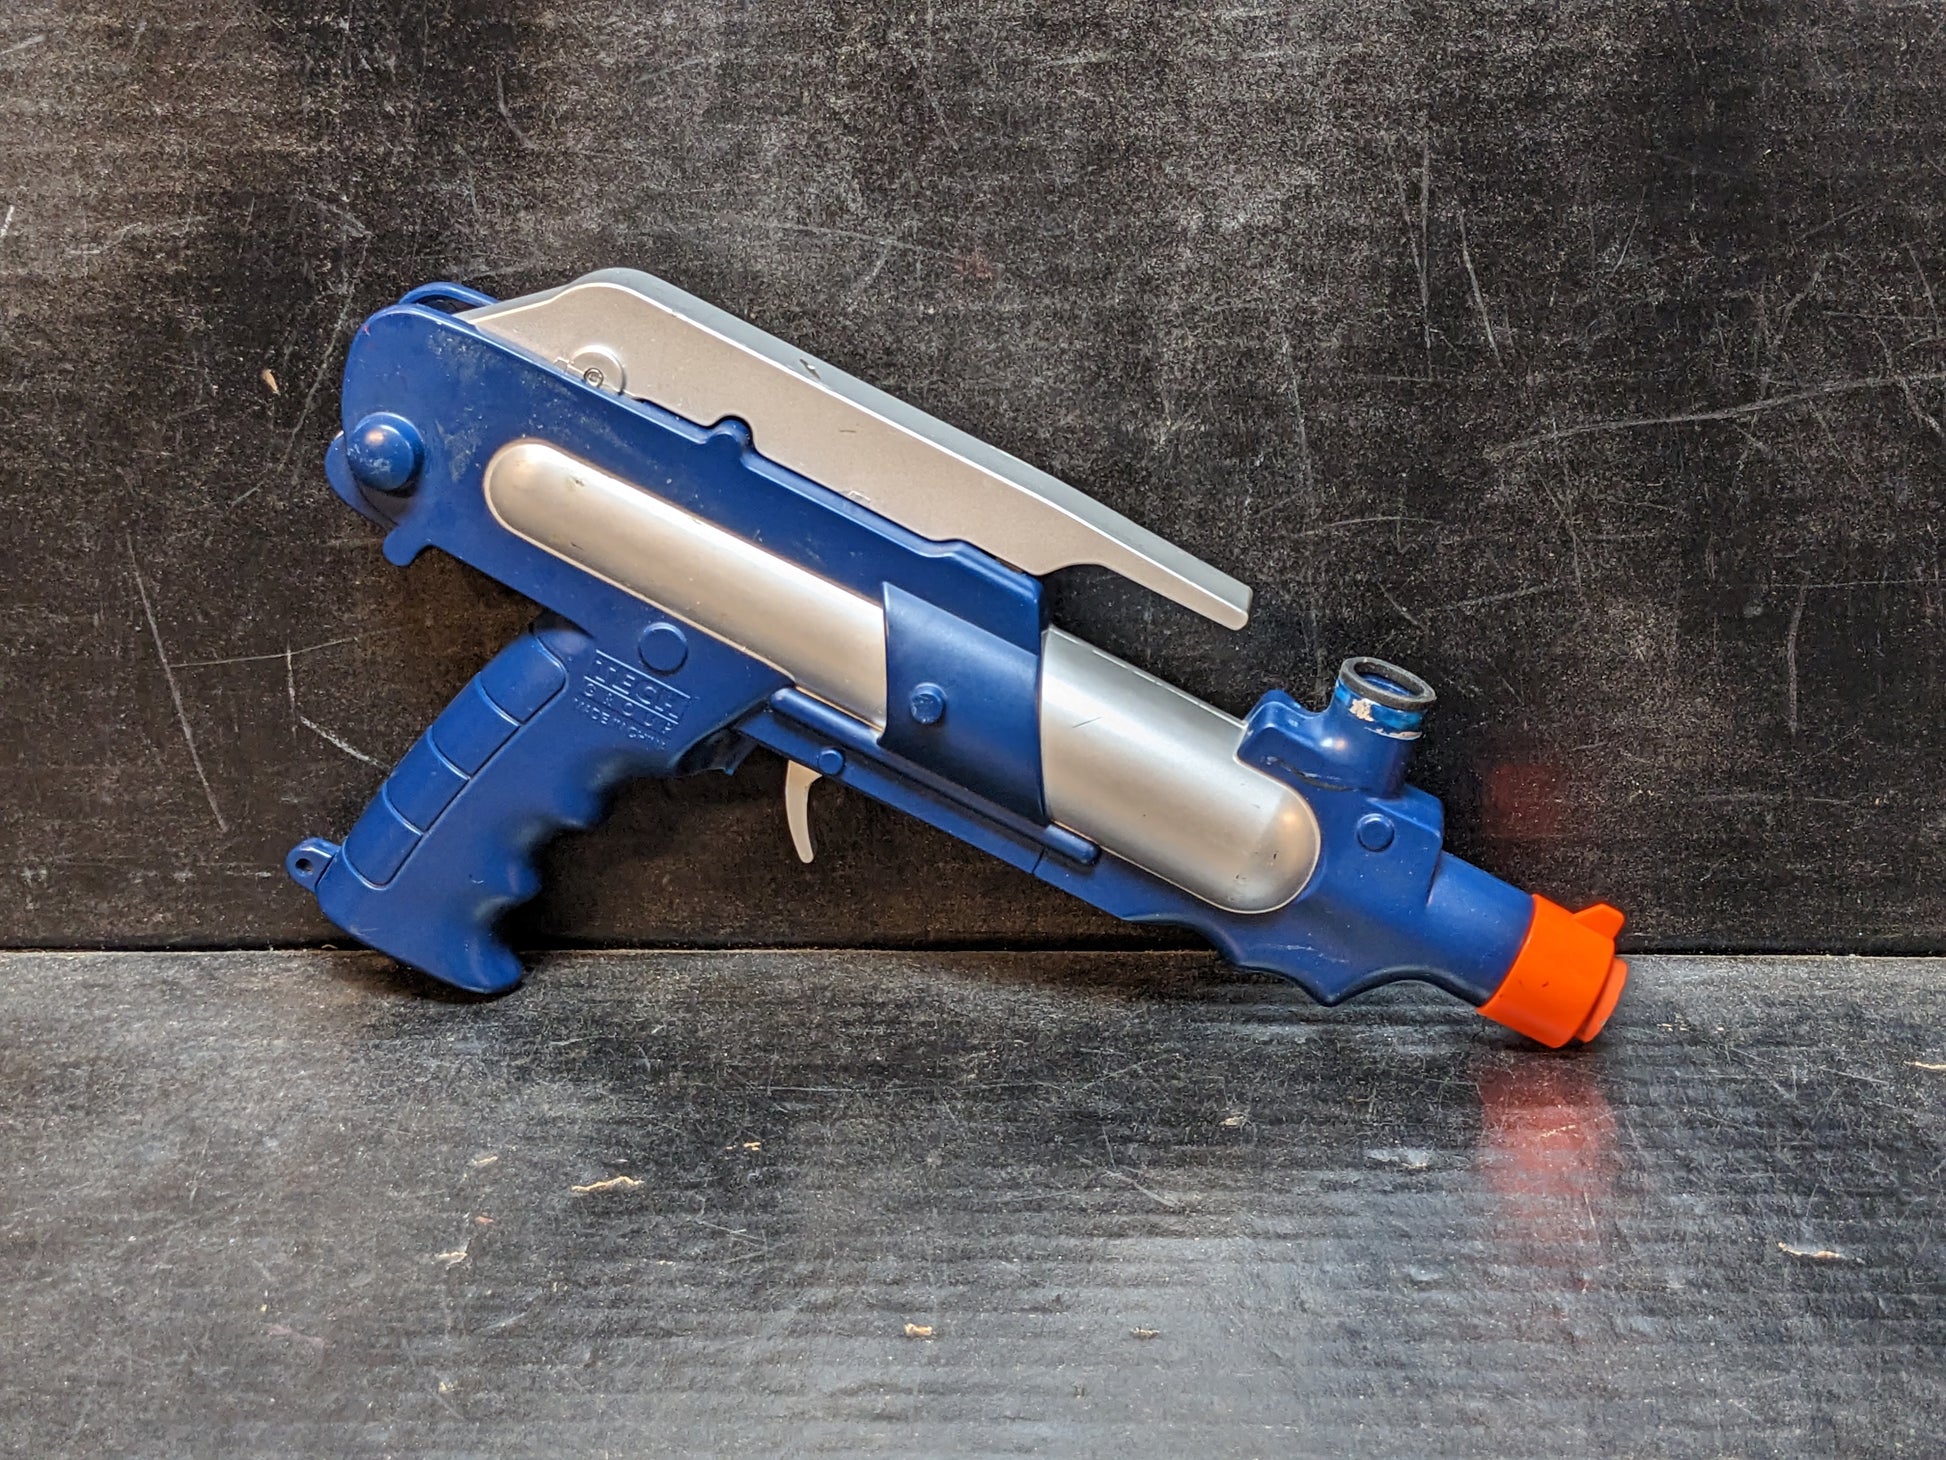 Nerf's New Blaster is a Less Messy Take on a Paintball Gun